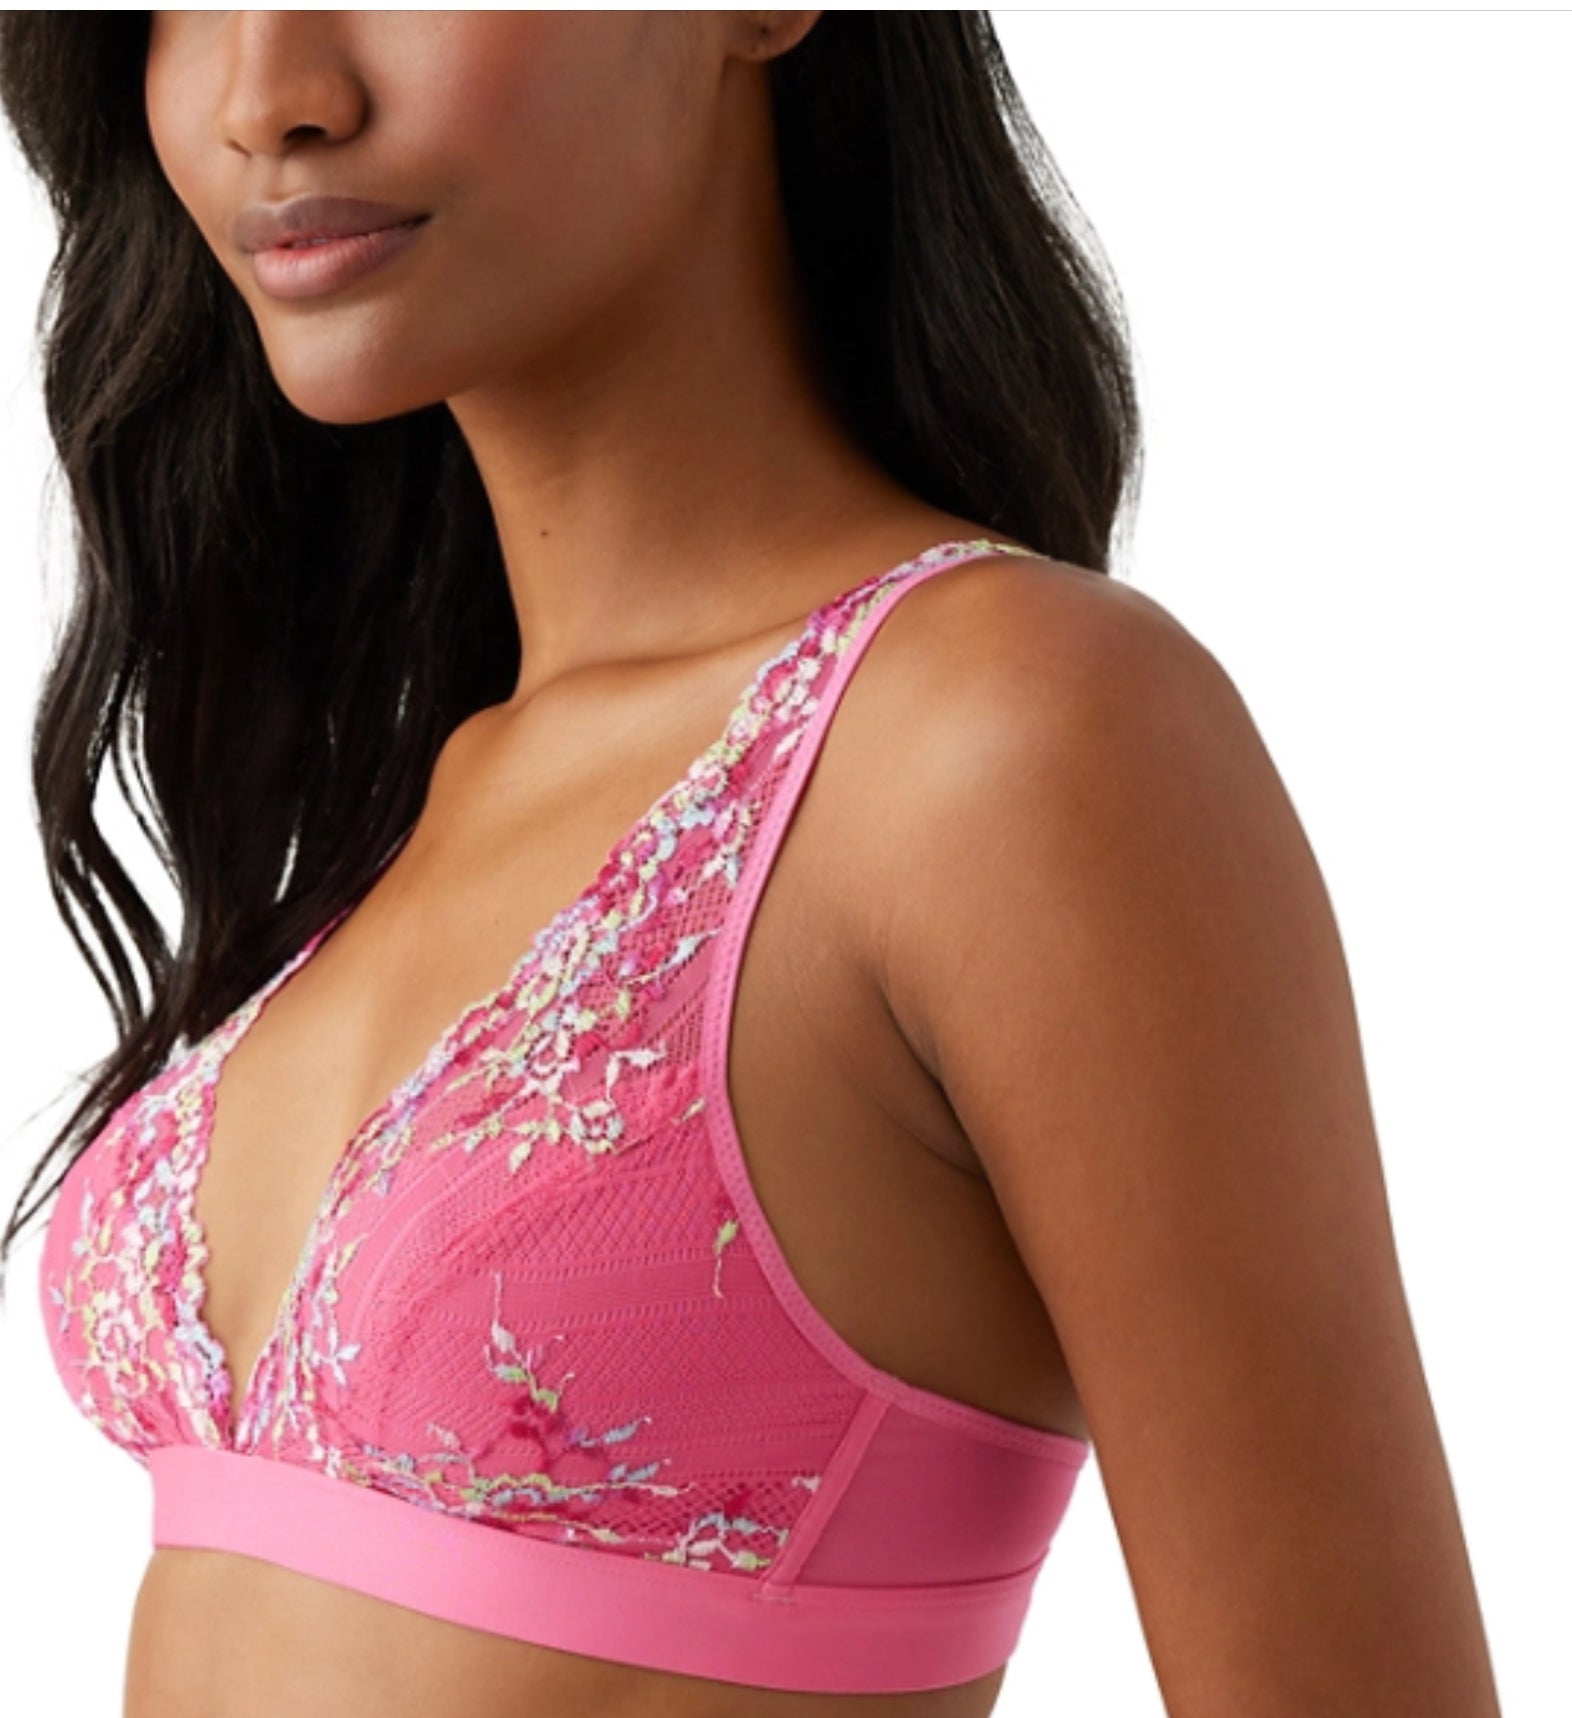 Embrace Lace wire free bralette by Wacoal 852191 in hot pink multi - Blue Sky Fashions & Lingerie